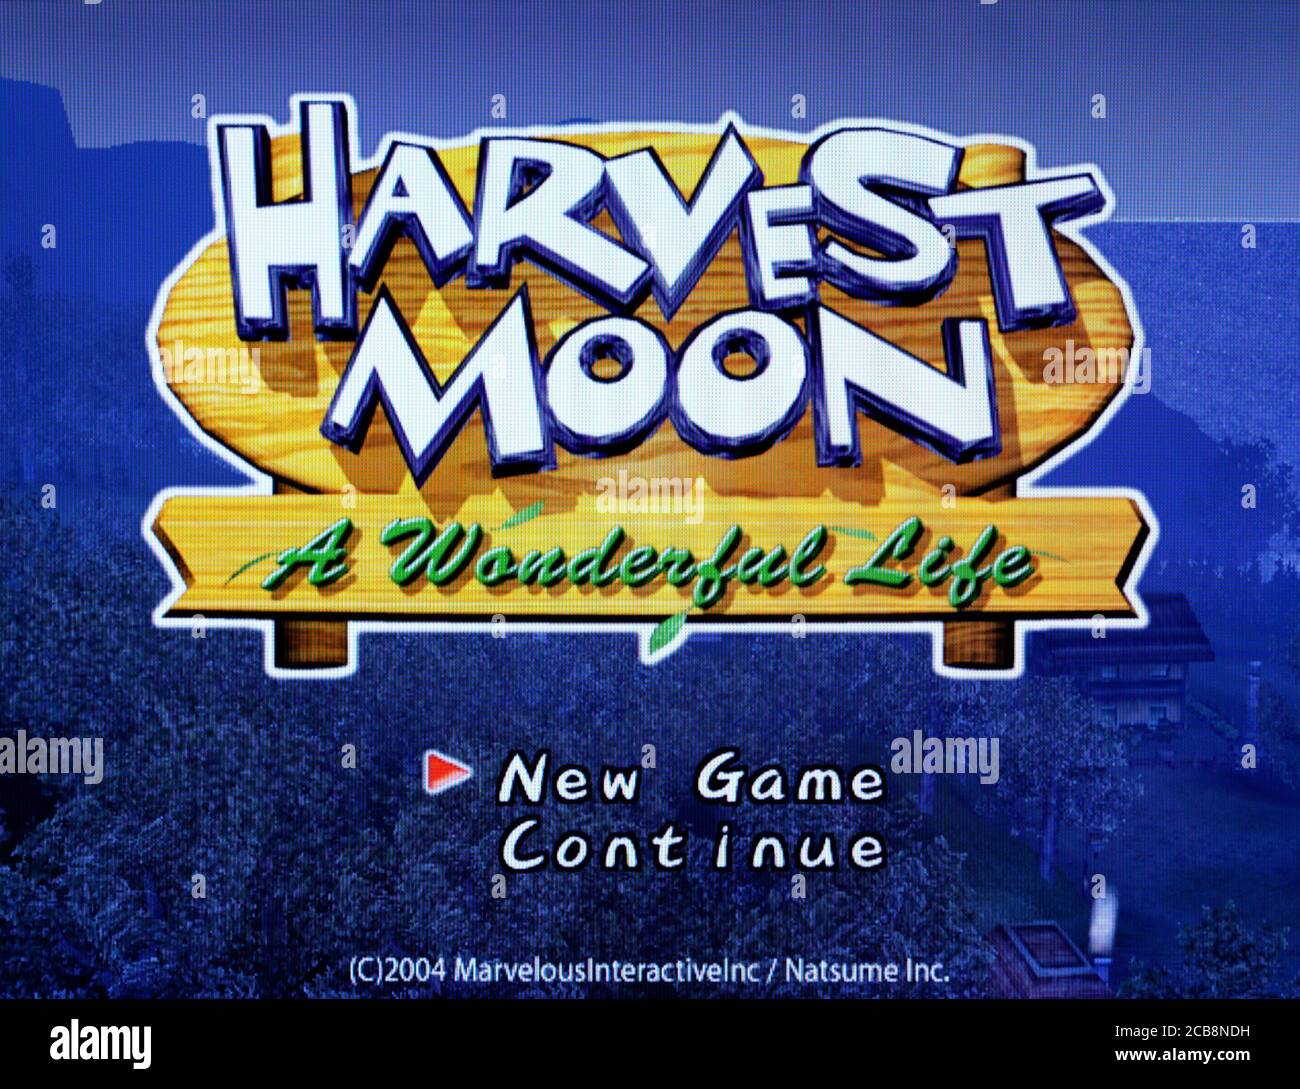 Harvest Moon A Wonderful Life - Nintendo Gamecube Videogame - Editorial use only Stock Photo